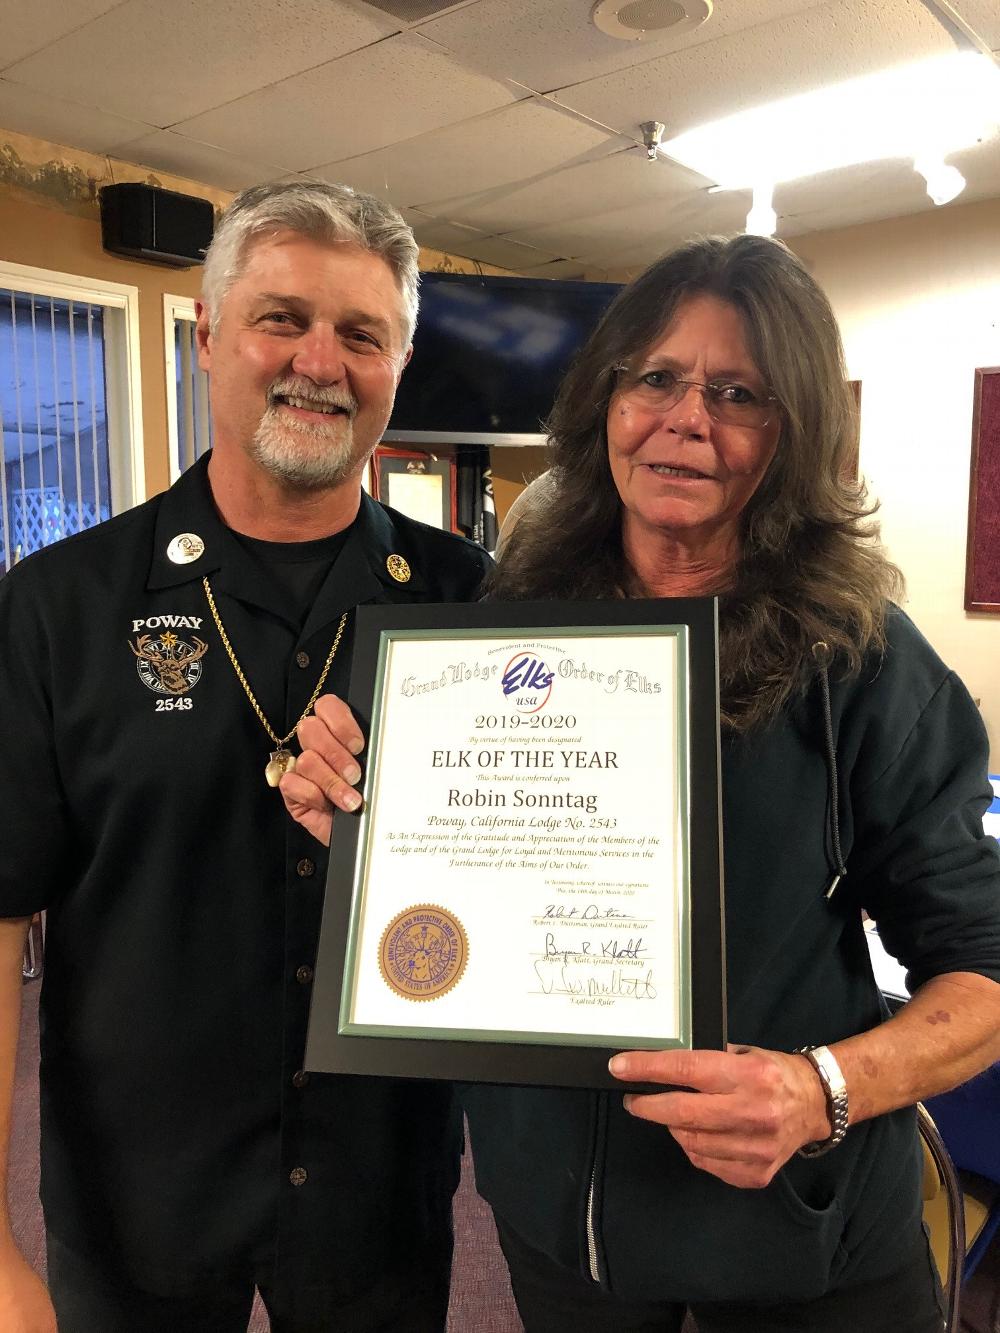 ER Dave Mullett, PER with the Elk of the Year, Robin Sonntag, who was presented with this award at the ER's Award Dinner 3.14.2020.  Congratulations and thank you both for your service!